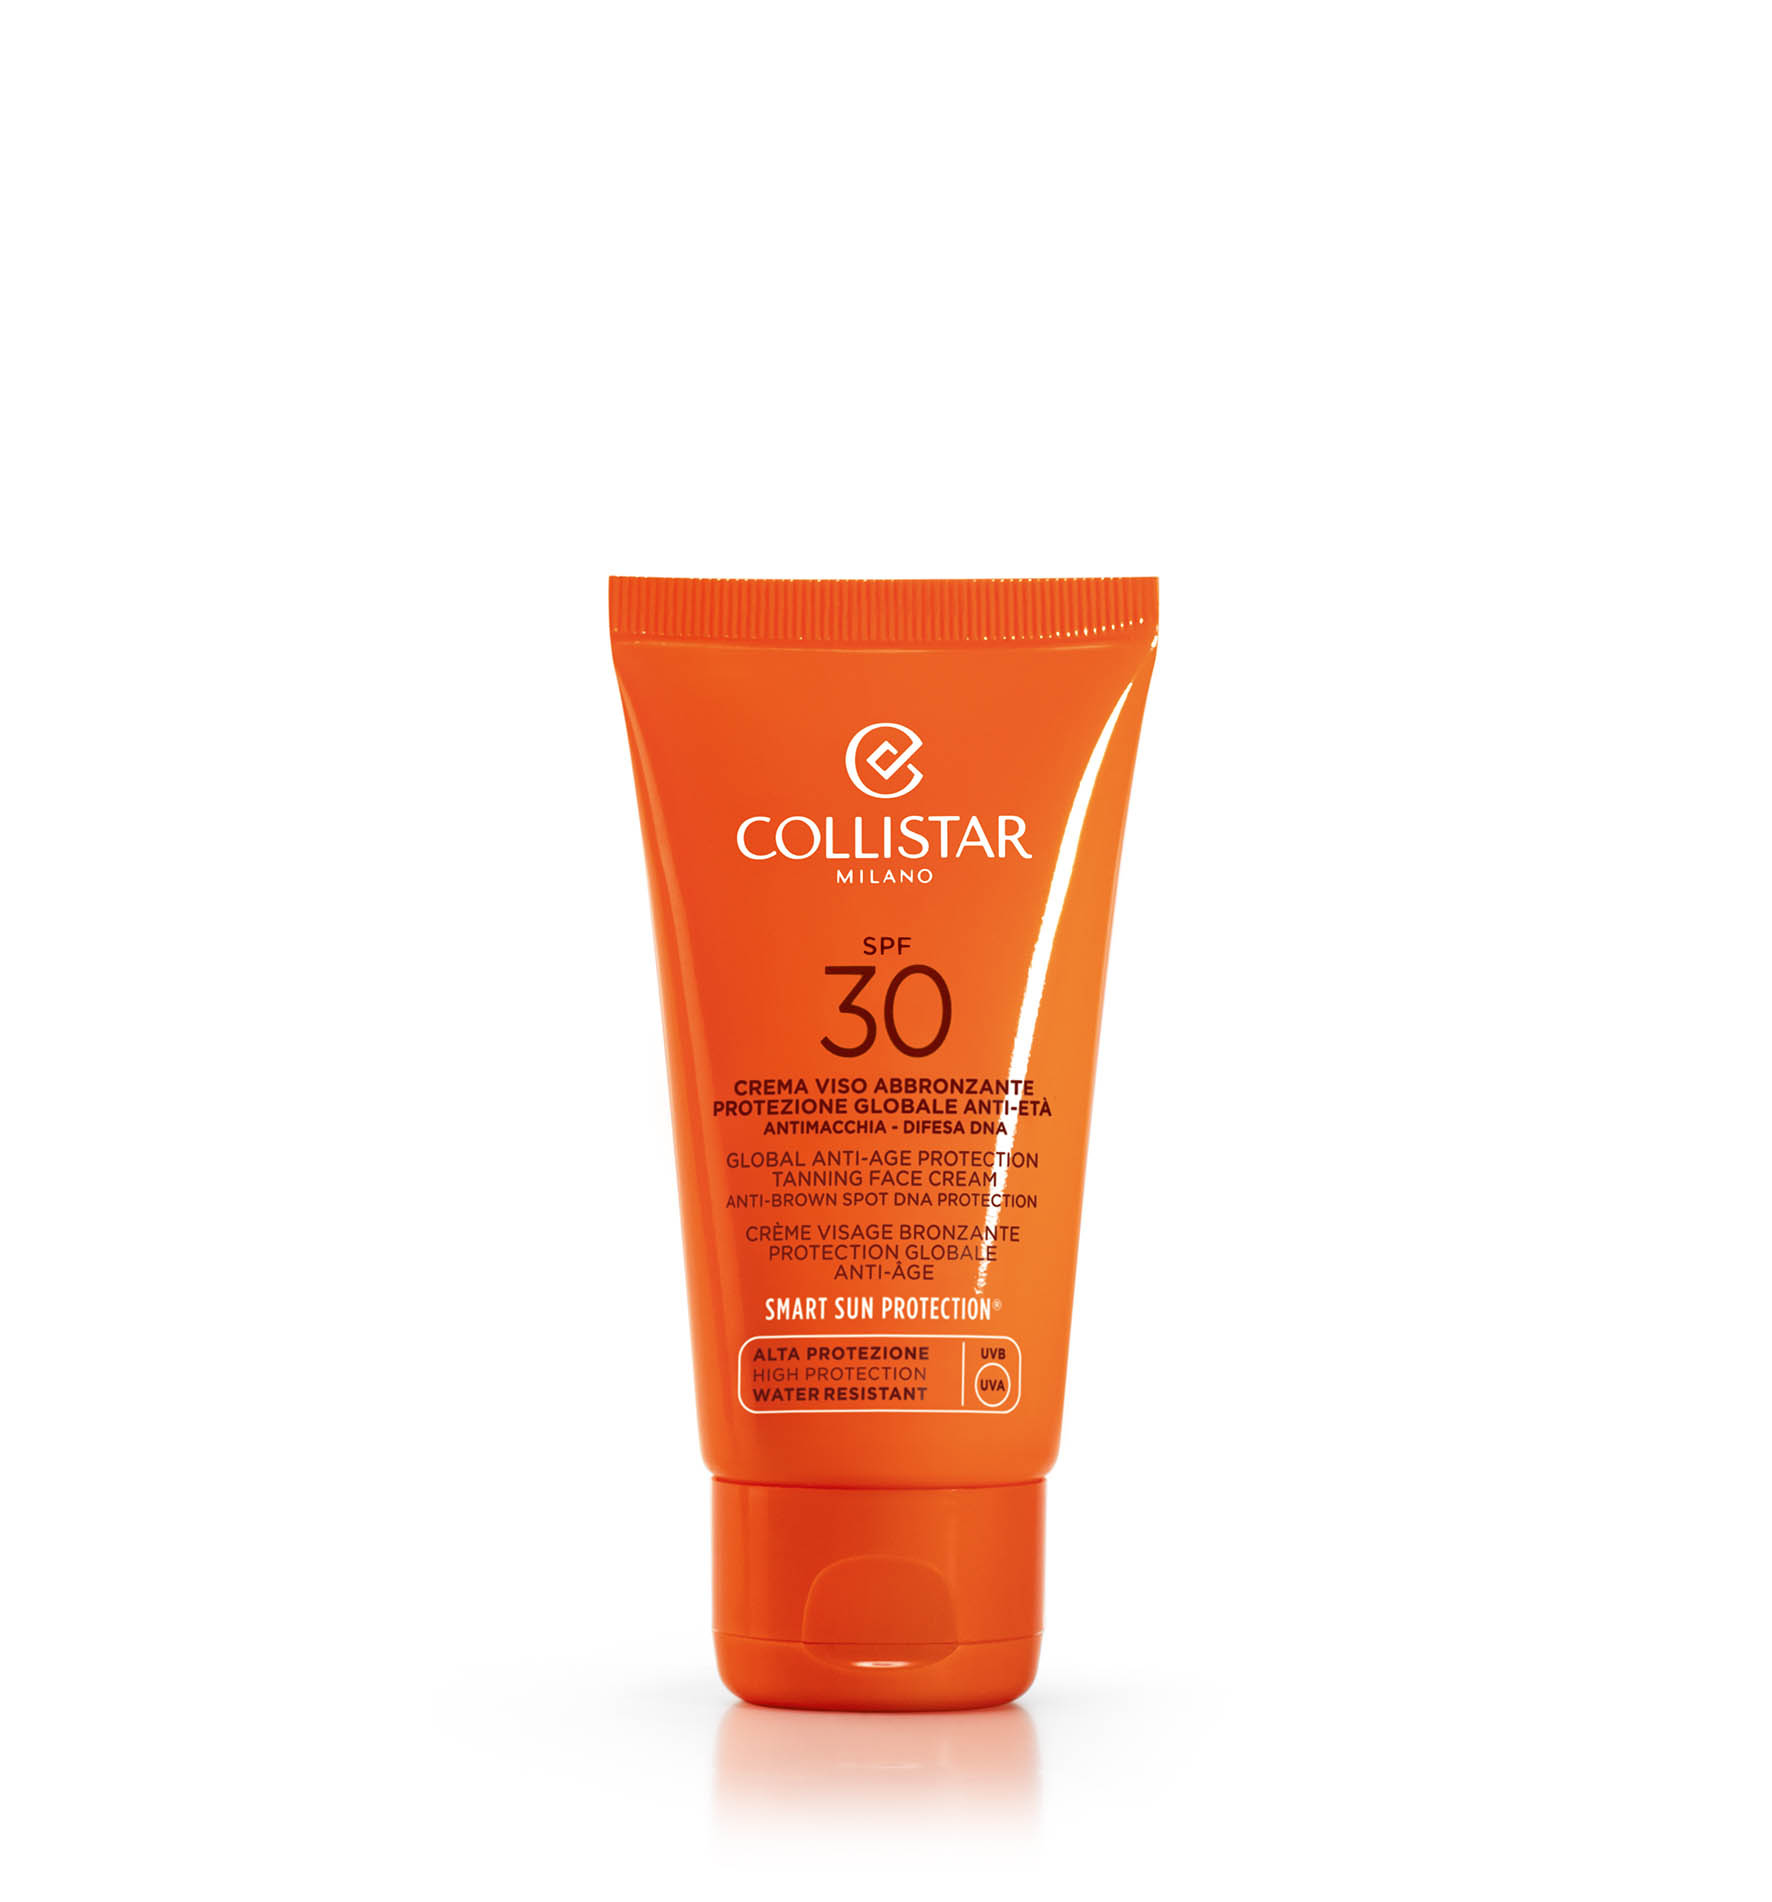 GLOBAL ANTI-AGE PROTECTION TANNING FACE CREAM SPF30 - PROTECTION | Collistar - Shop Online Ufficiale